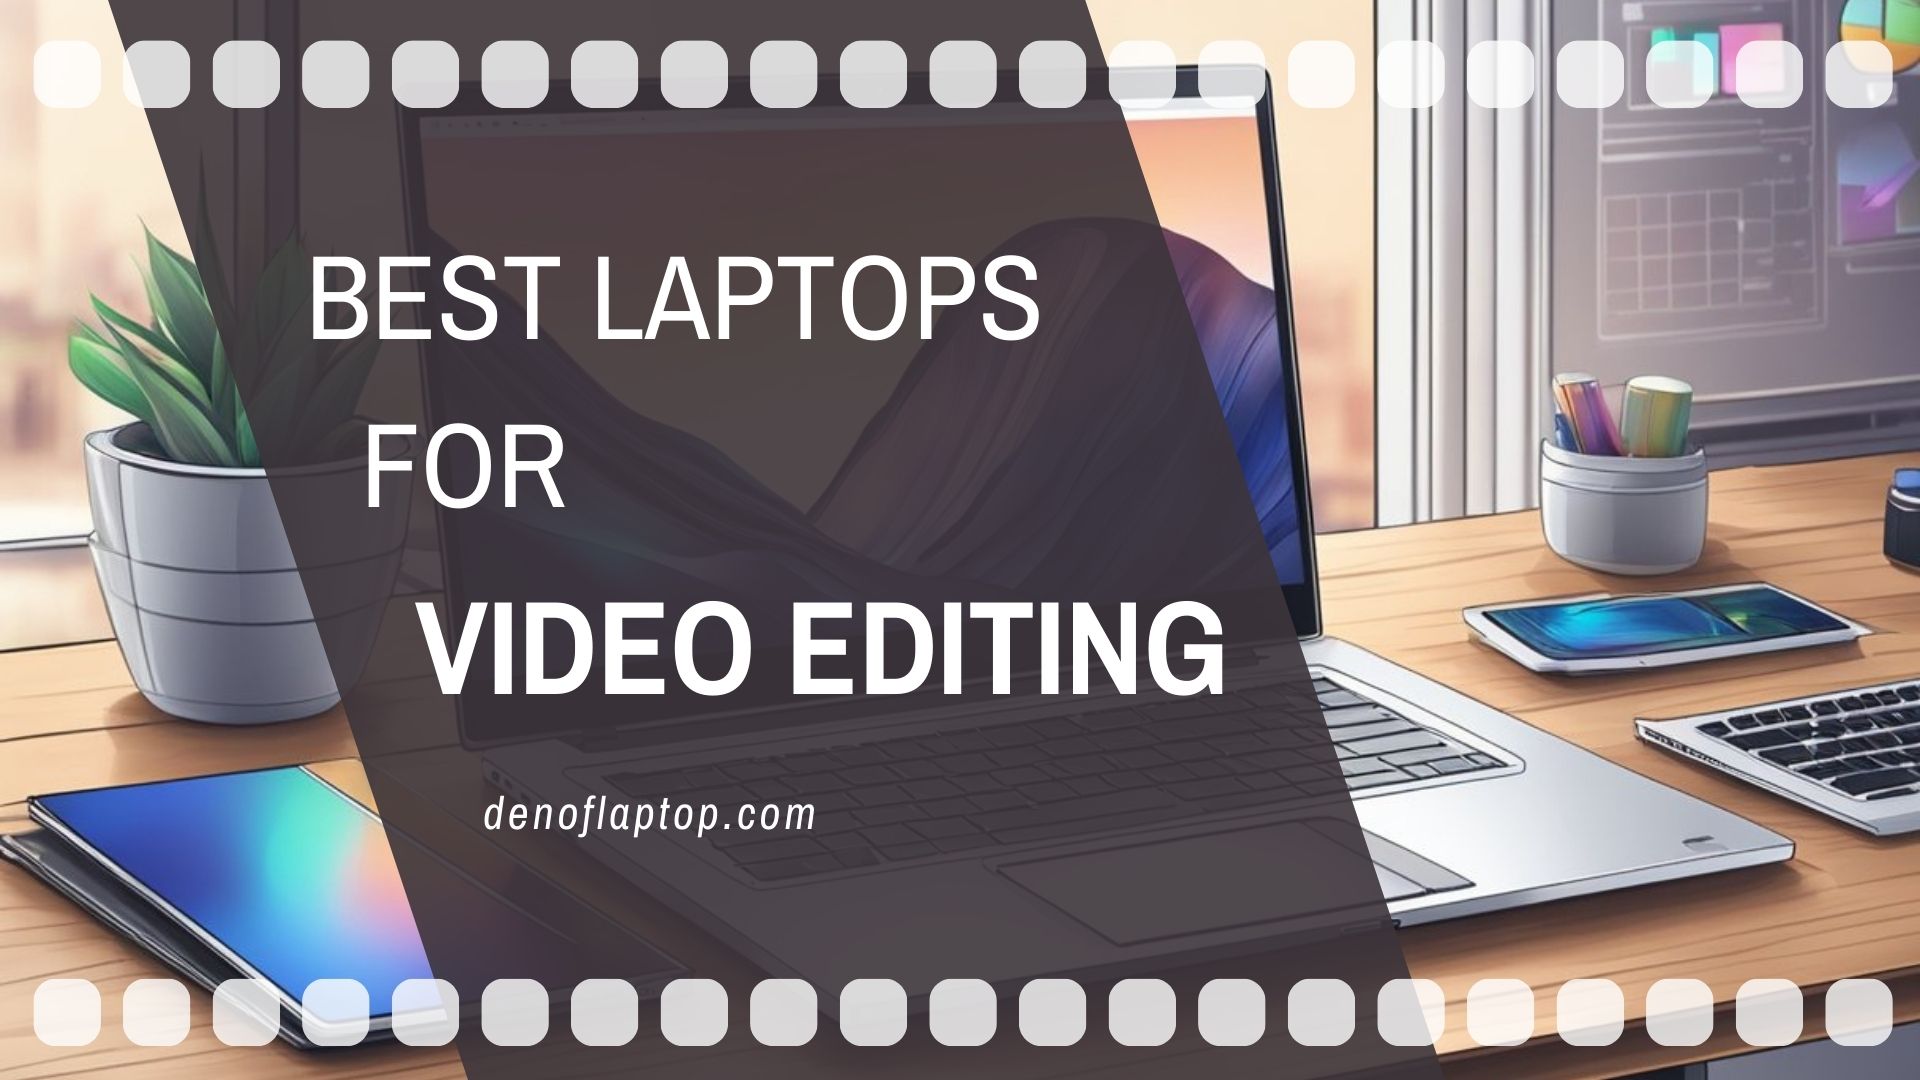 Best laptops for Video Editing - Featured